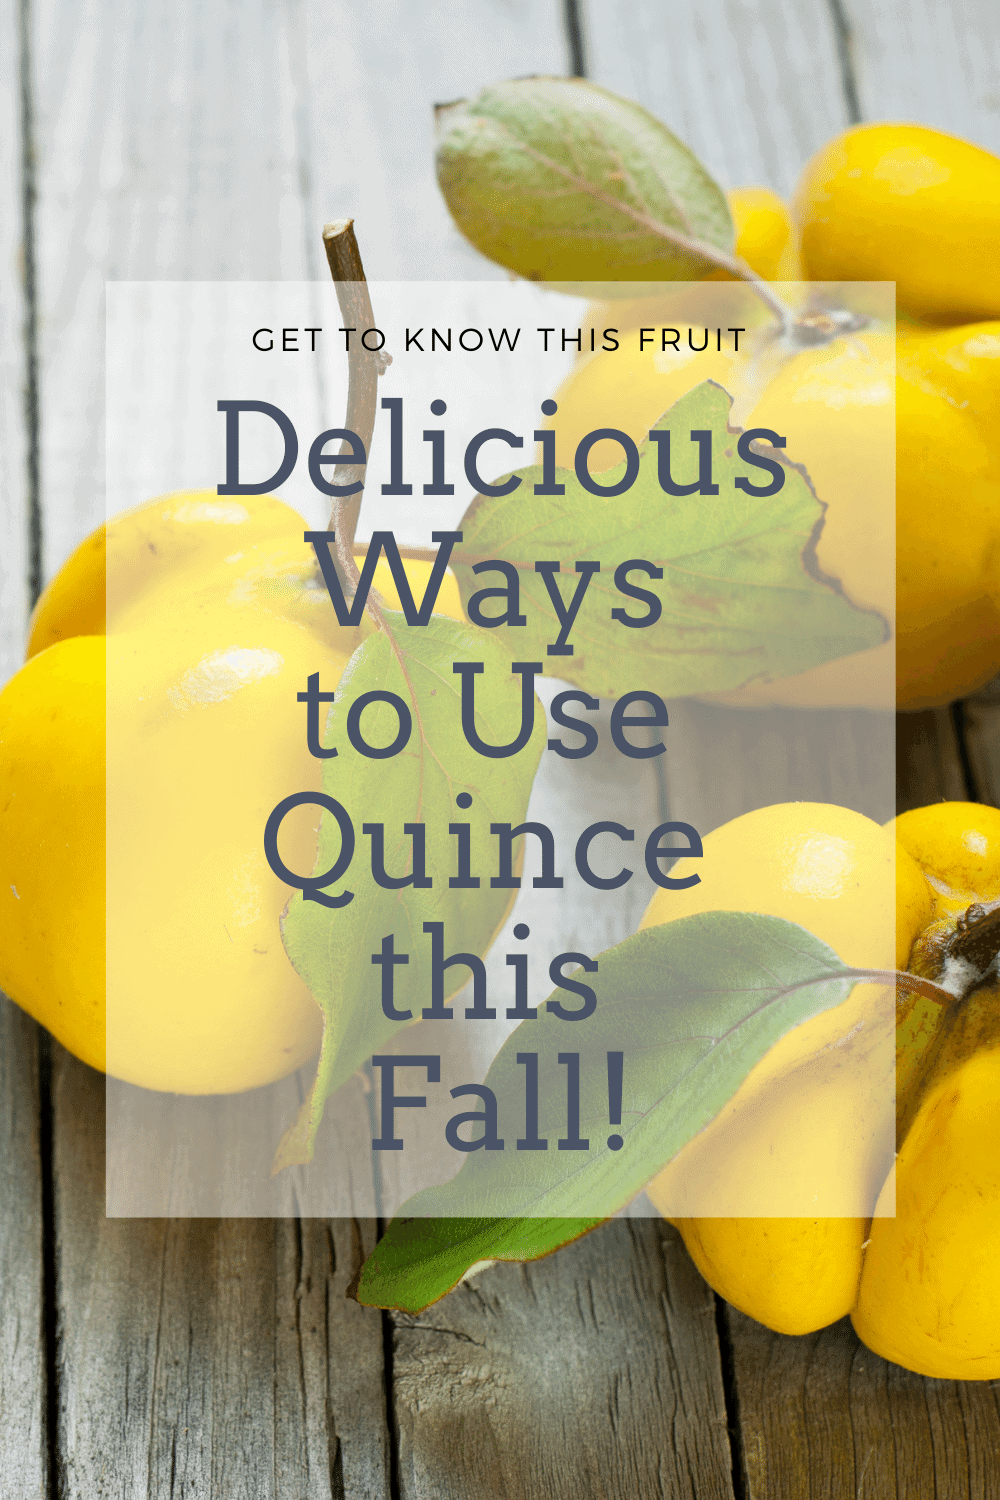 Amazing Quince Fruit Recipes You Should Try this Fall